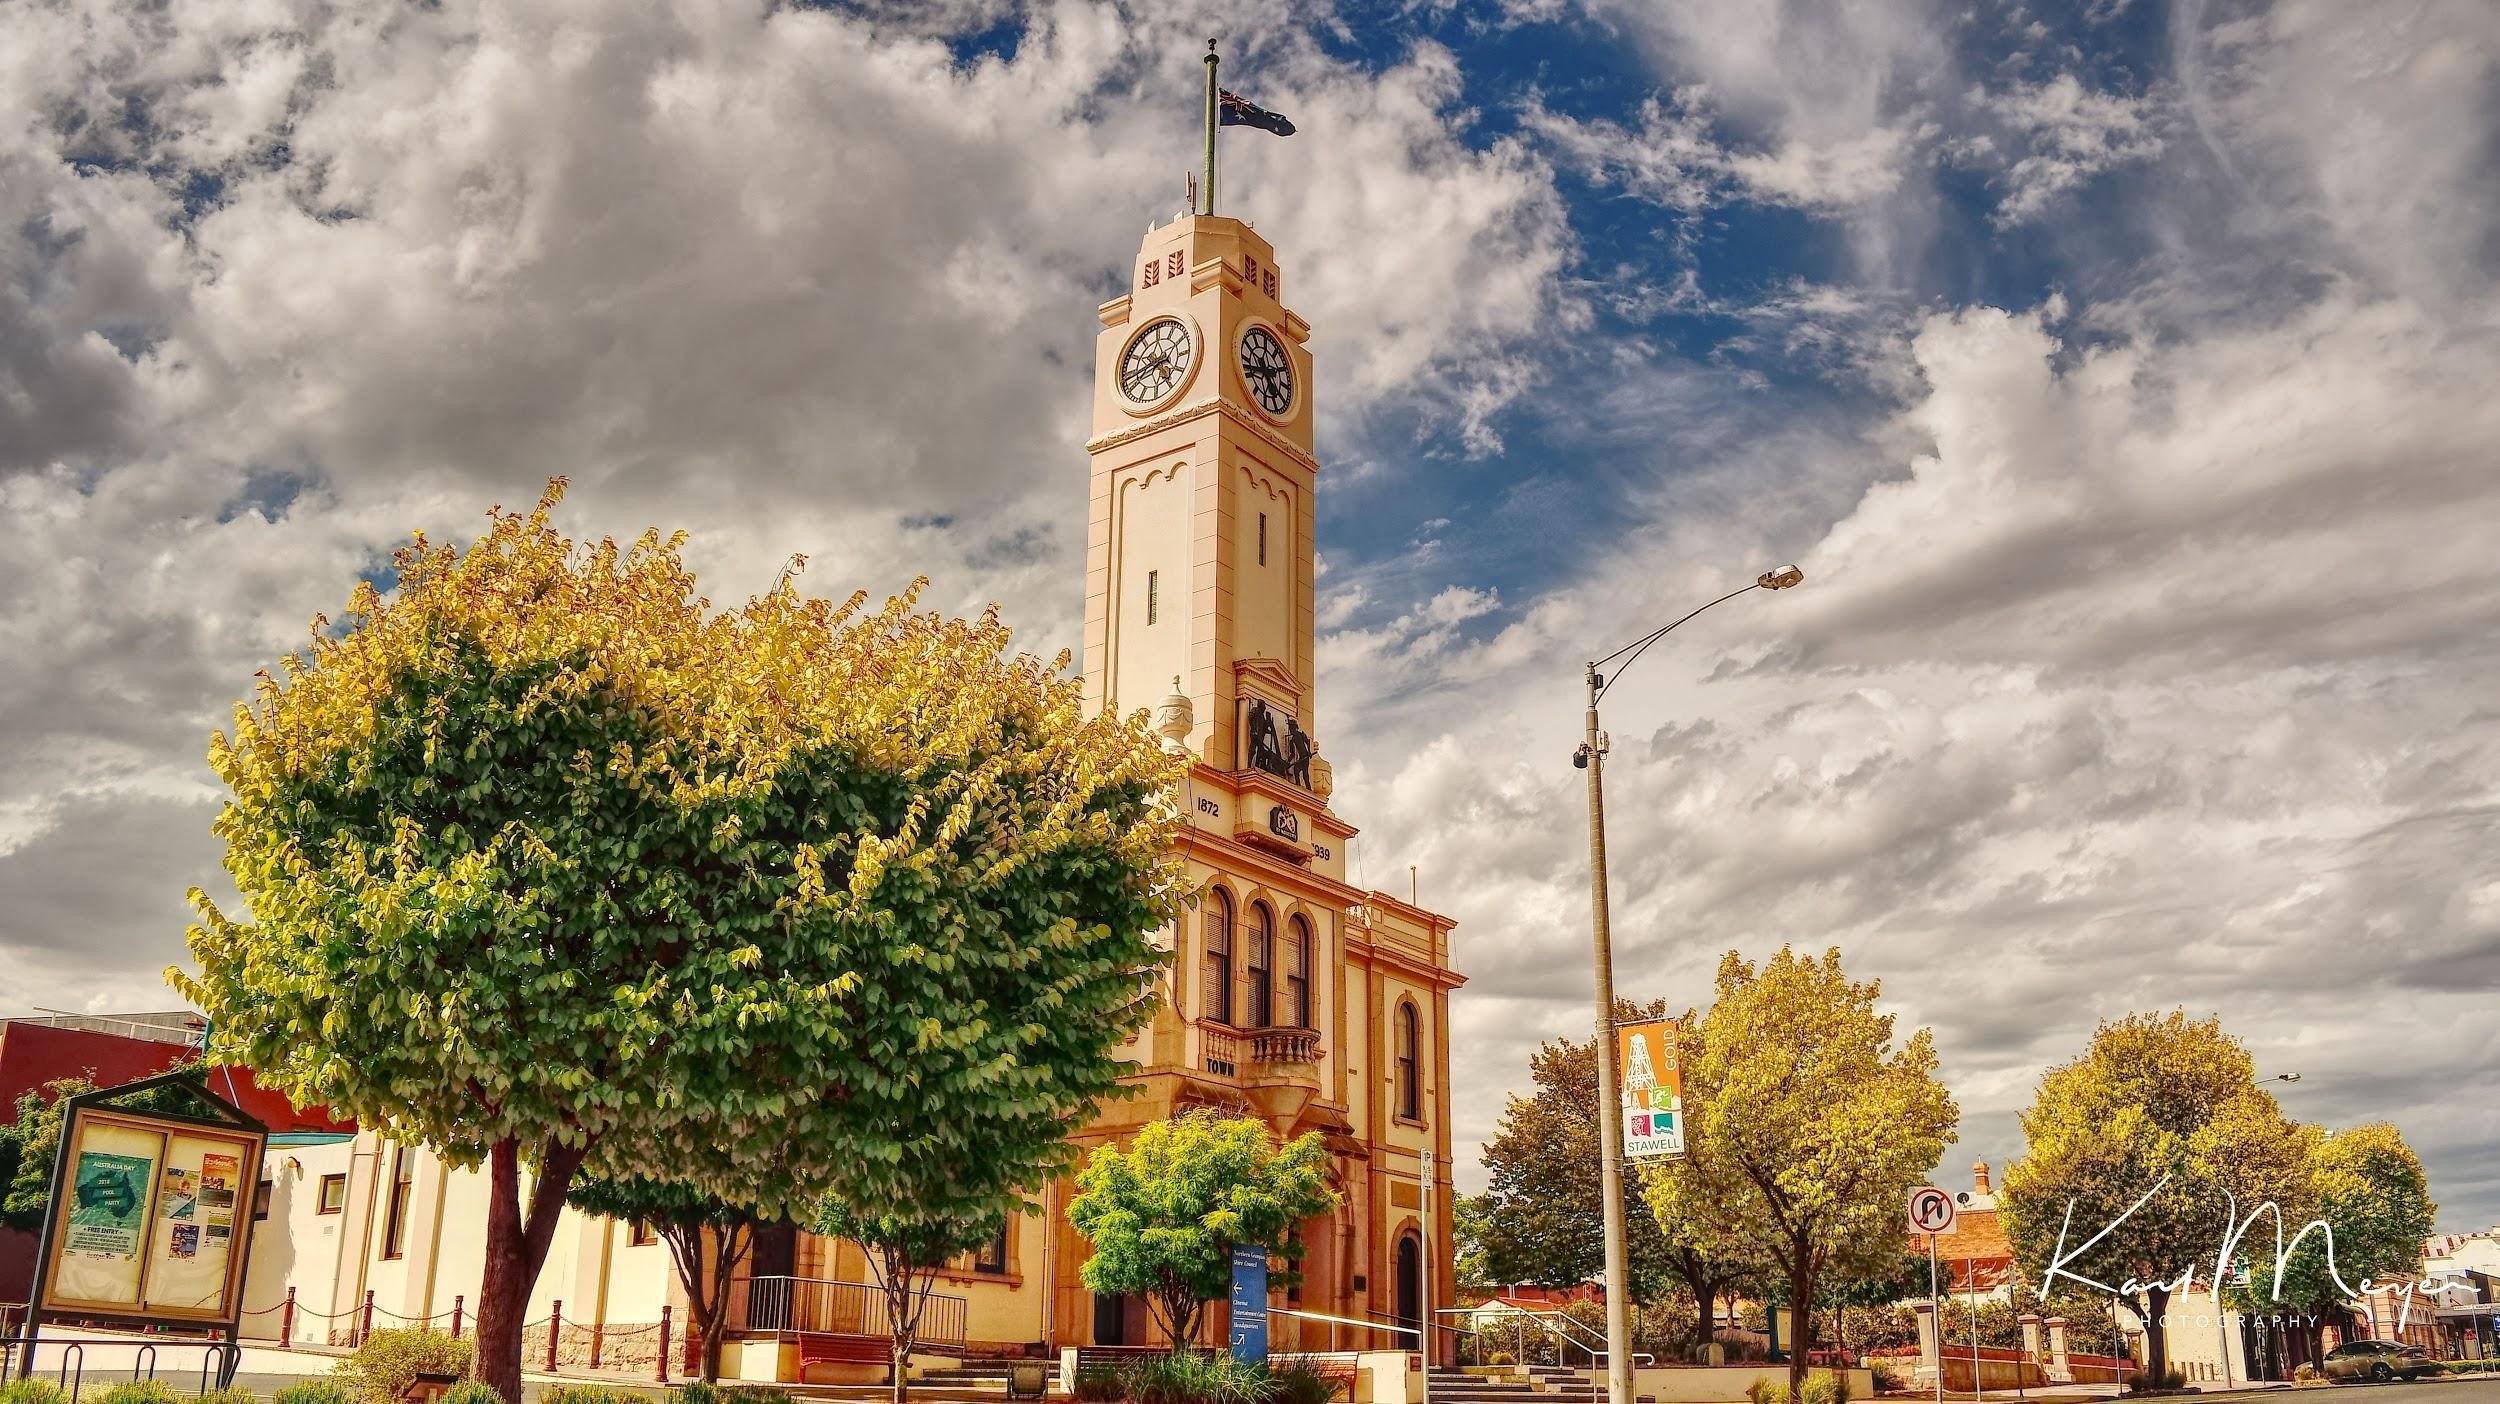 Stawell Town Hall